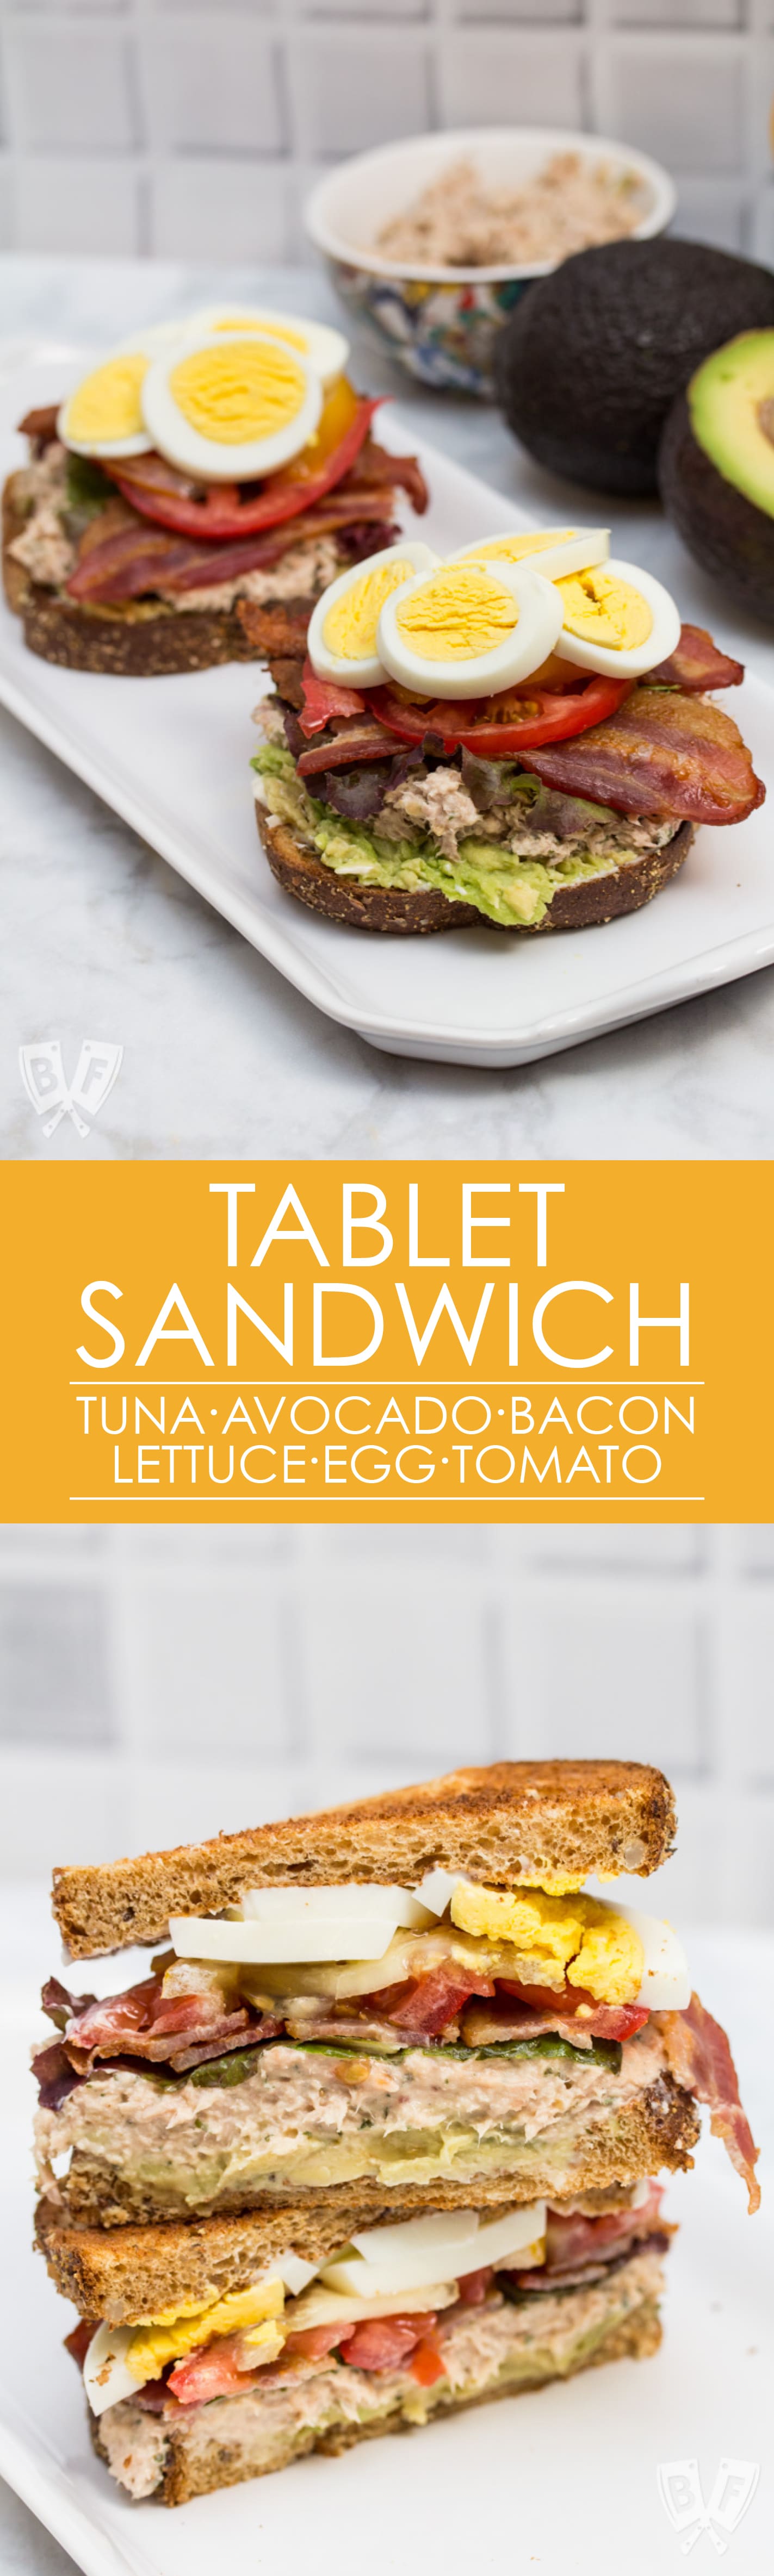 TABLET Sandwich: A classic BLT, tuna salad, and avocado toast join forces in this epic sandwich mashup! An easy, delicious lunchtime classic that's sure to be a hit! #BaconMonth